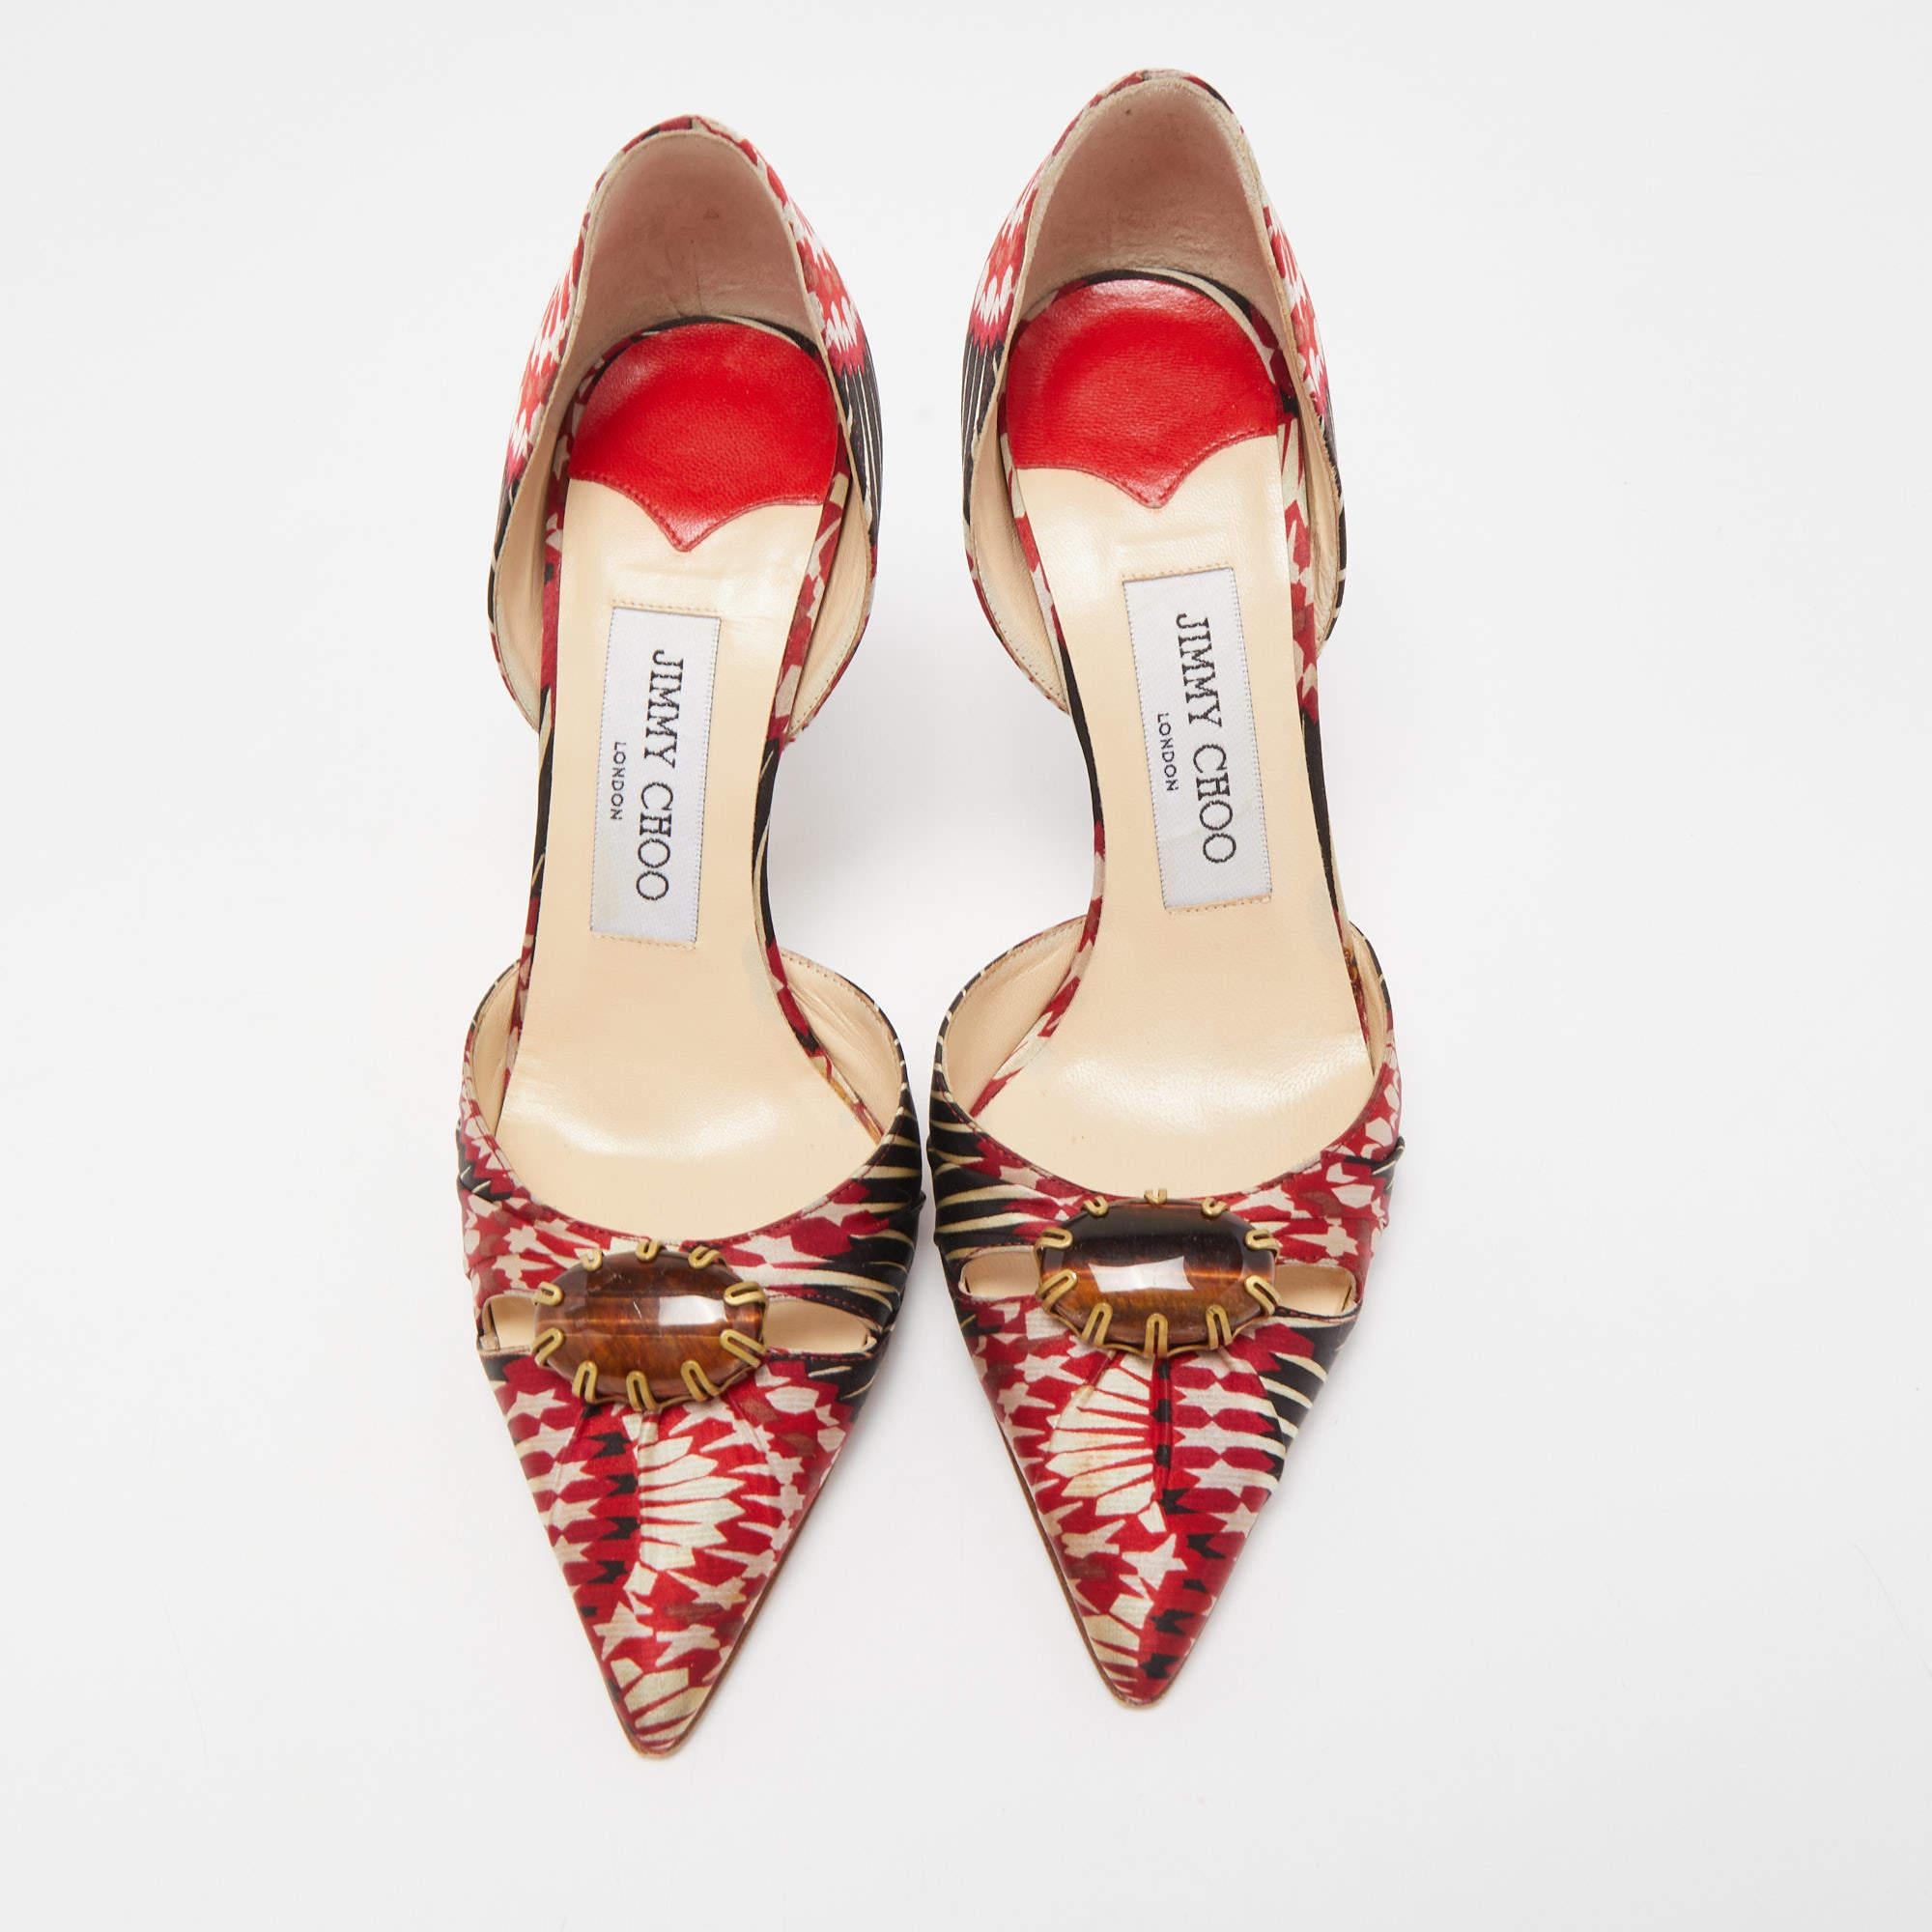 Jimmy Choo Floral Satin Ruby Cut Out D' Orsay Pointed Toe Pumps Size 35 2